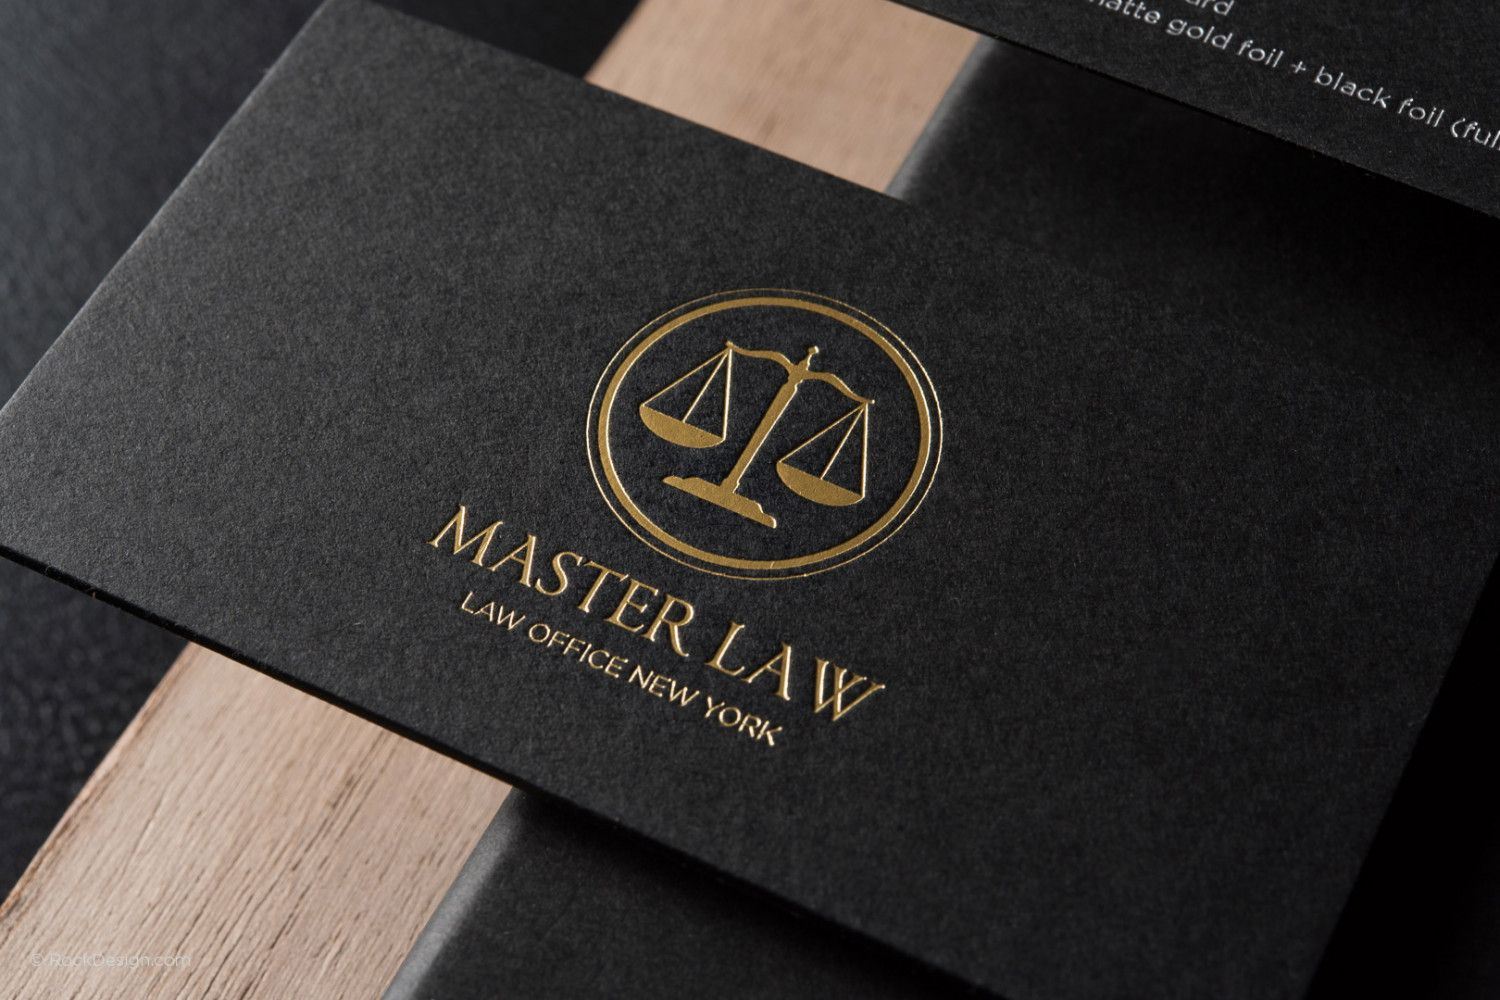 Free Lawyer Business Card Template | Rockdesign | Lawyer Intended For Lawyer Business Cards Templates